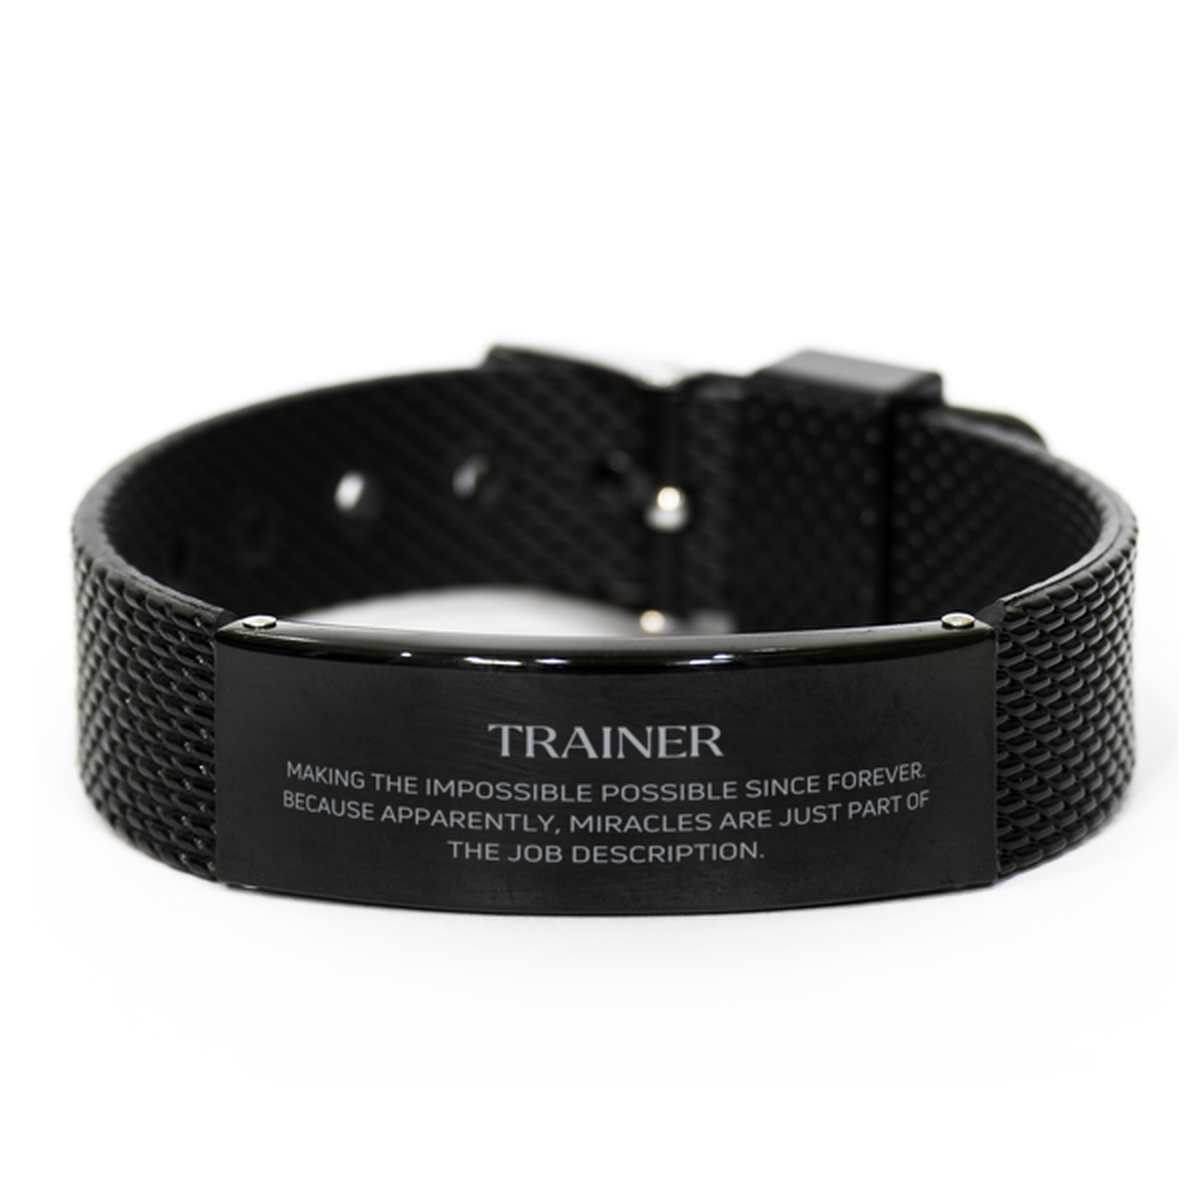 Funny Trainer Gifts, Miracles are just part of the job description, Inspirational Birthday Black Shark Mesh Bracelet For Trainer, Men, Women, Coworkers, Friends, Boss